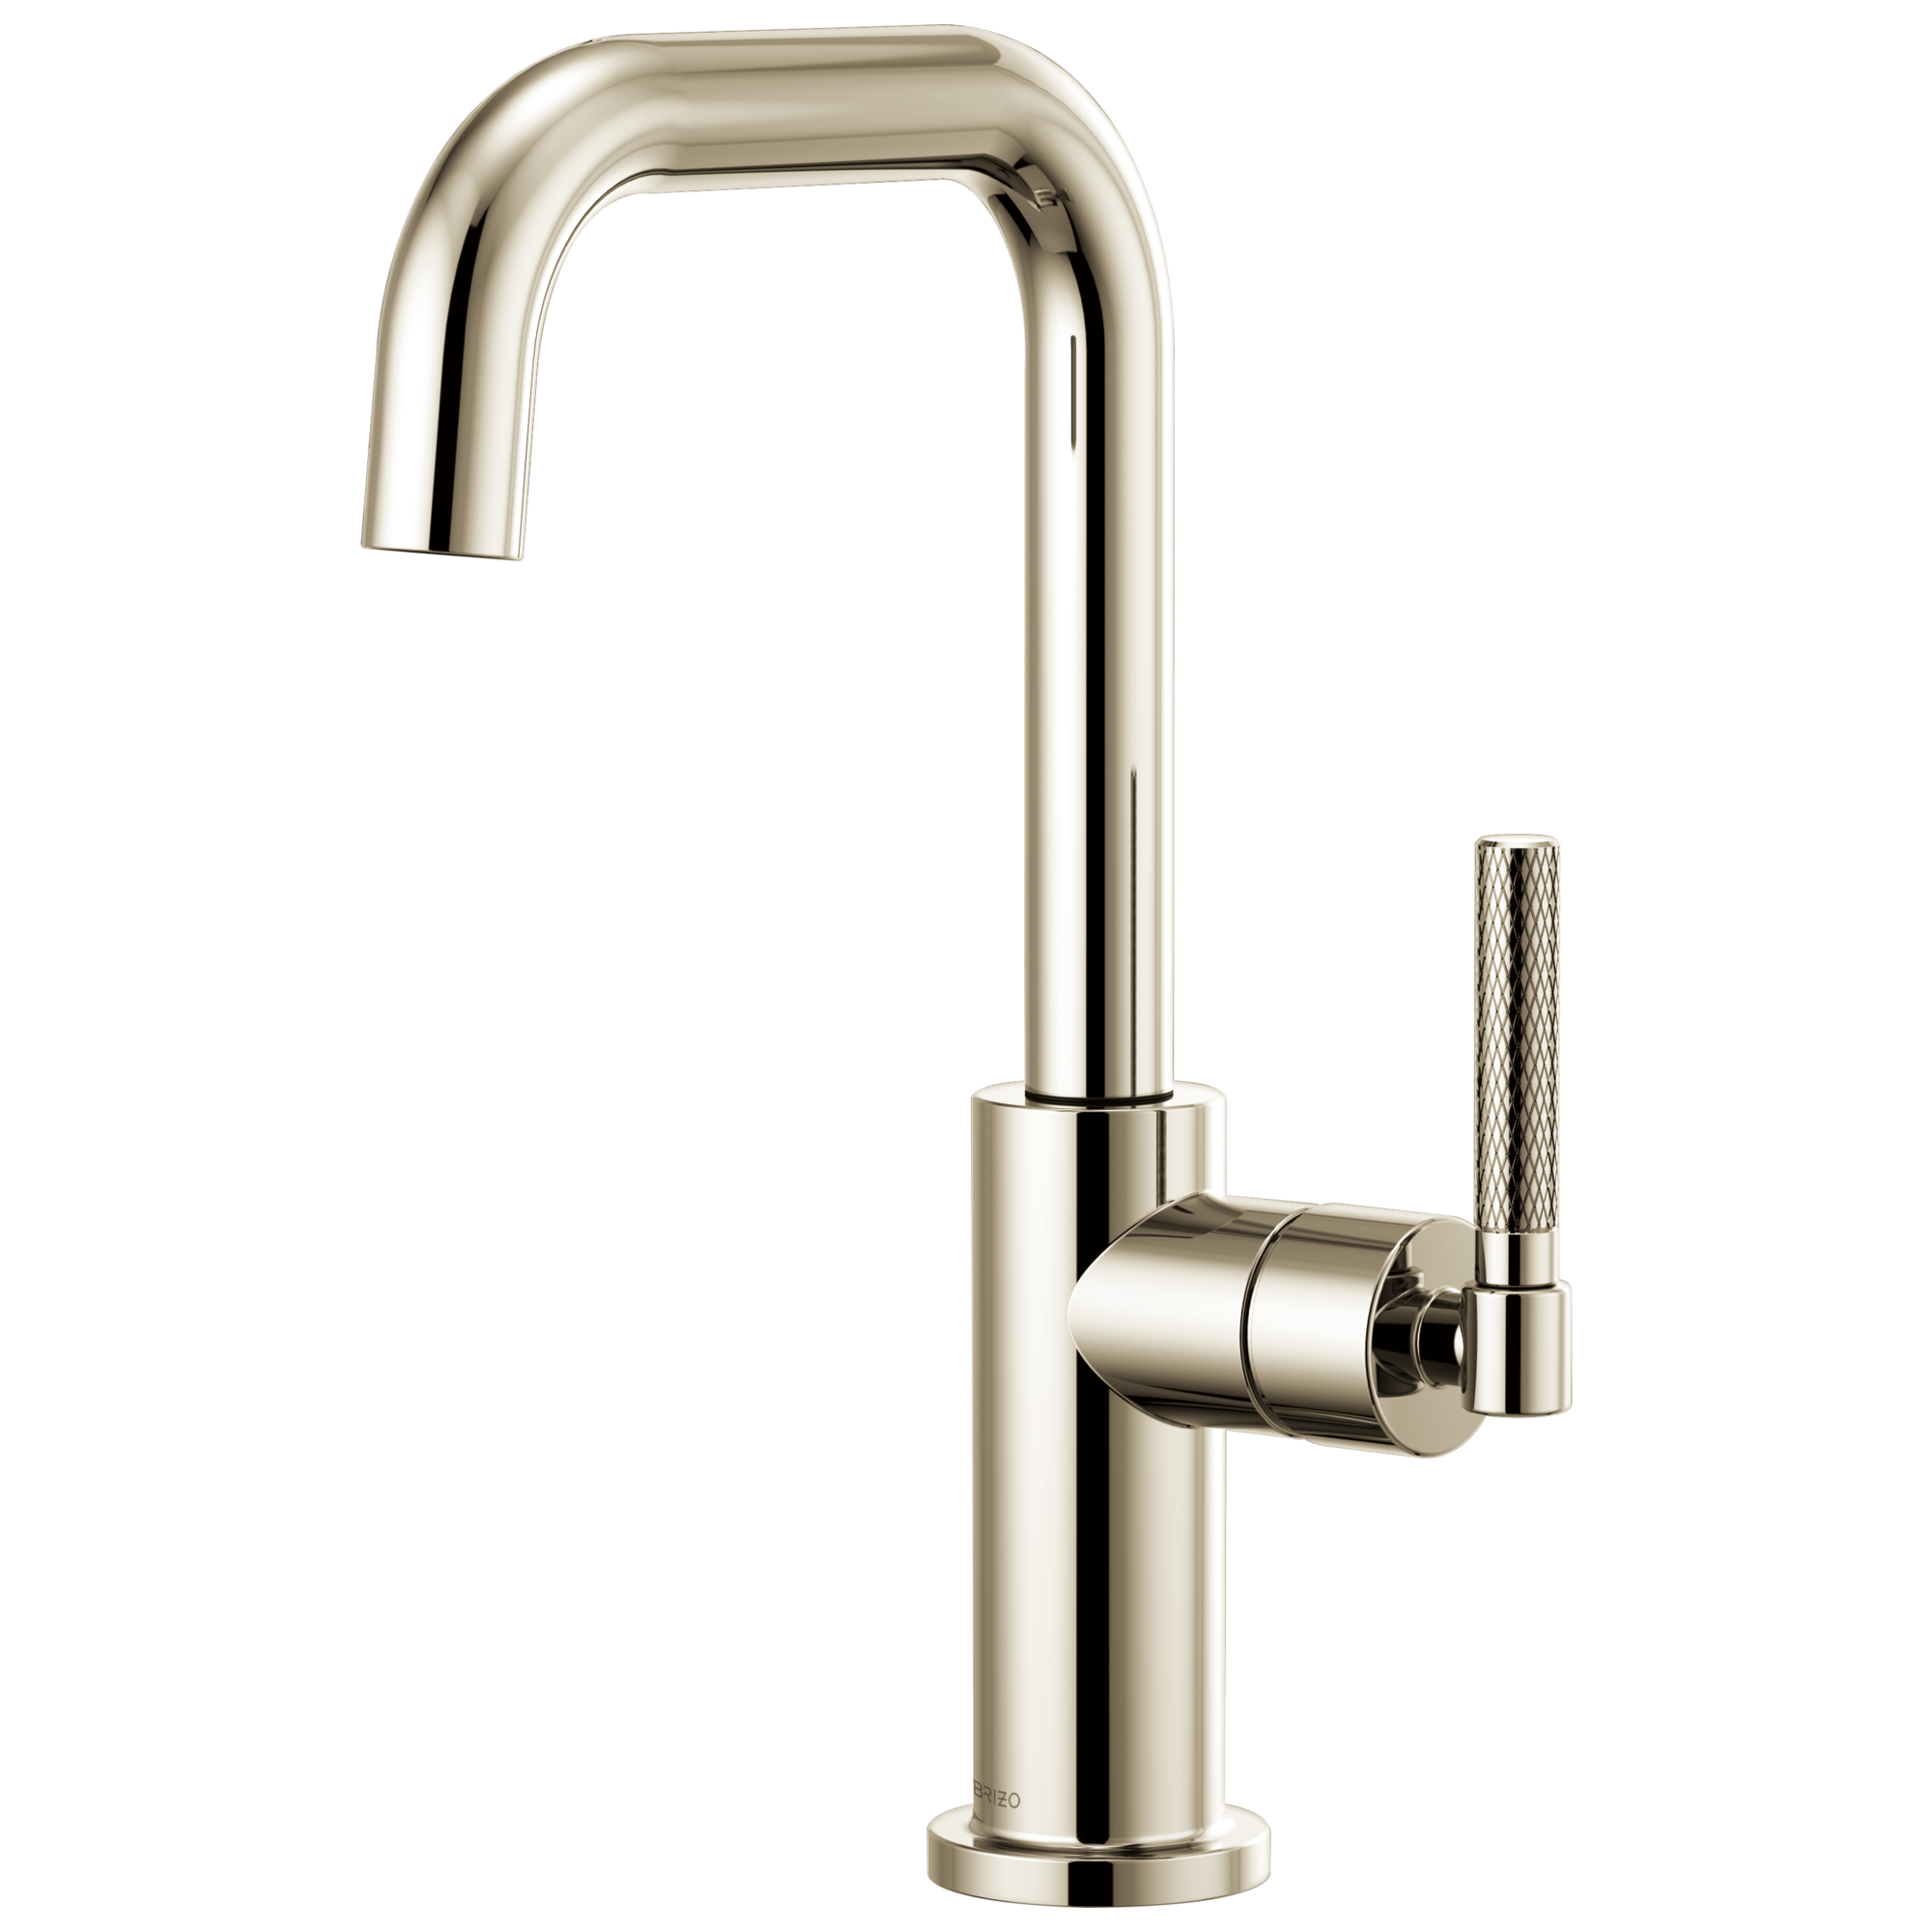 Brizo Litze Bar Faucet with Square Spout and Knurled Handle Kit